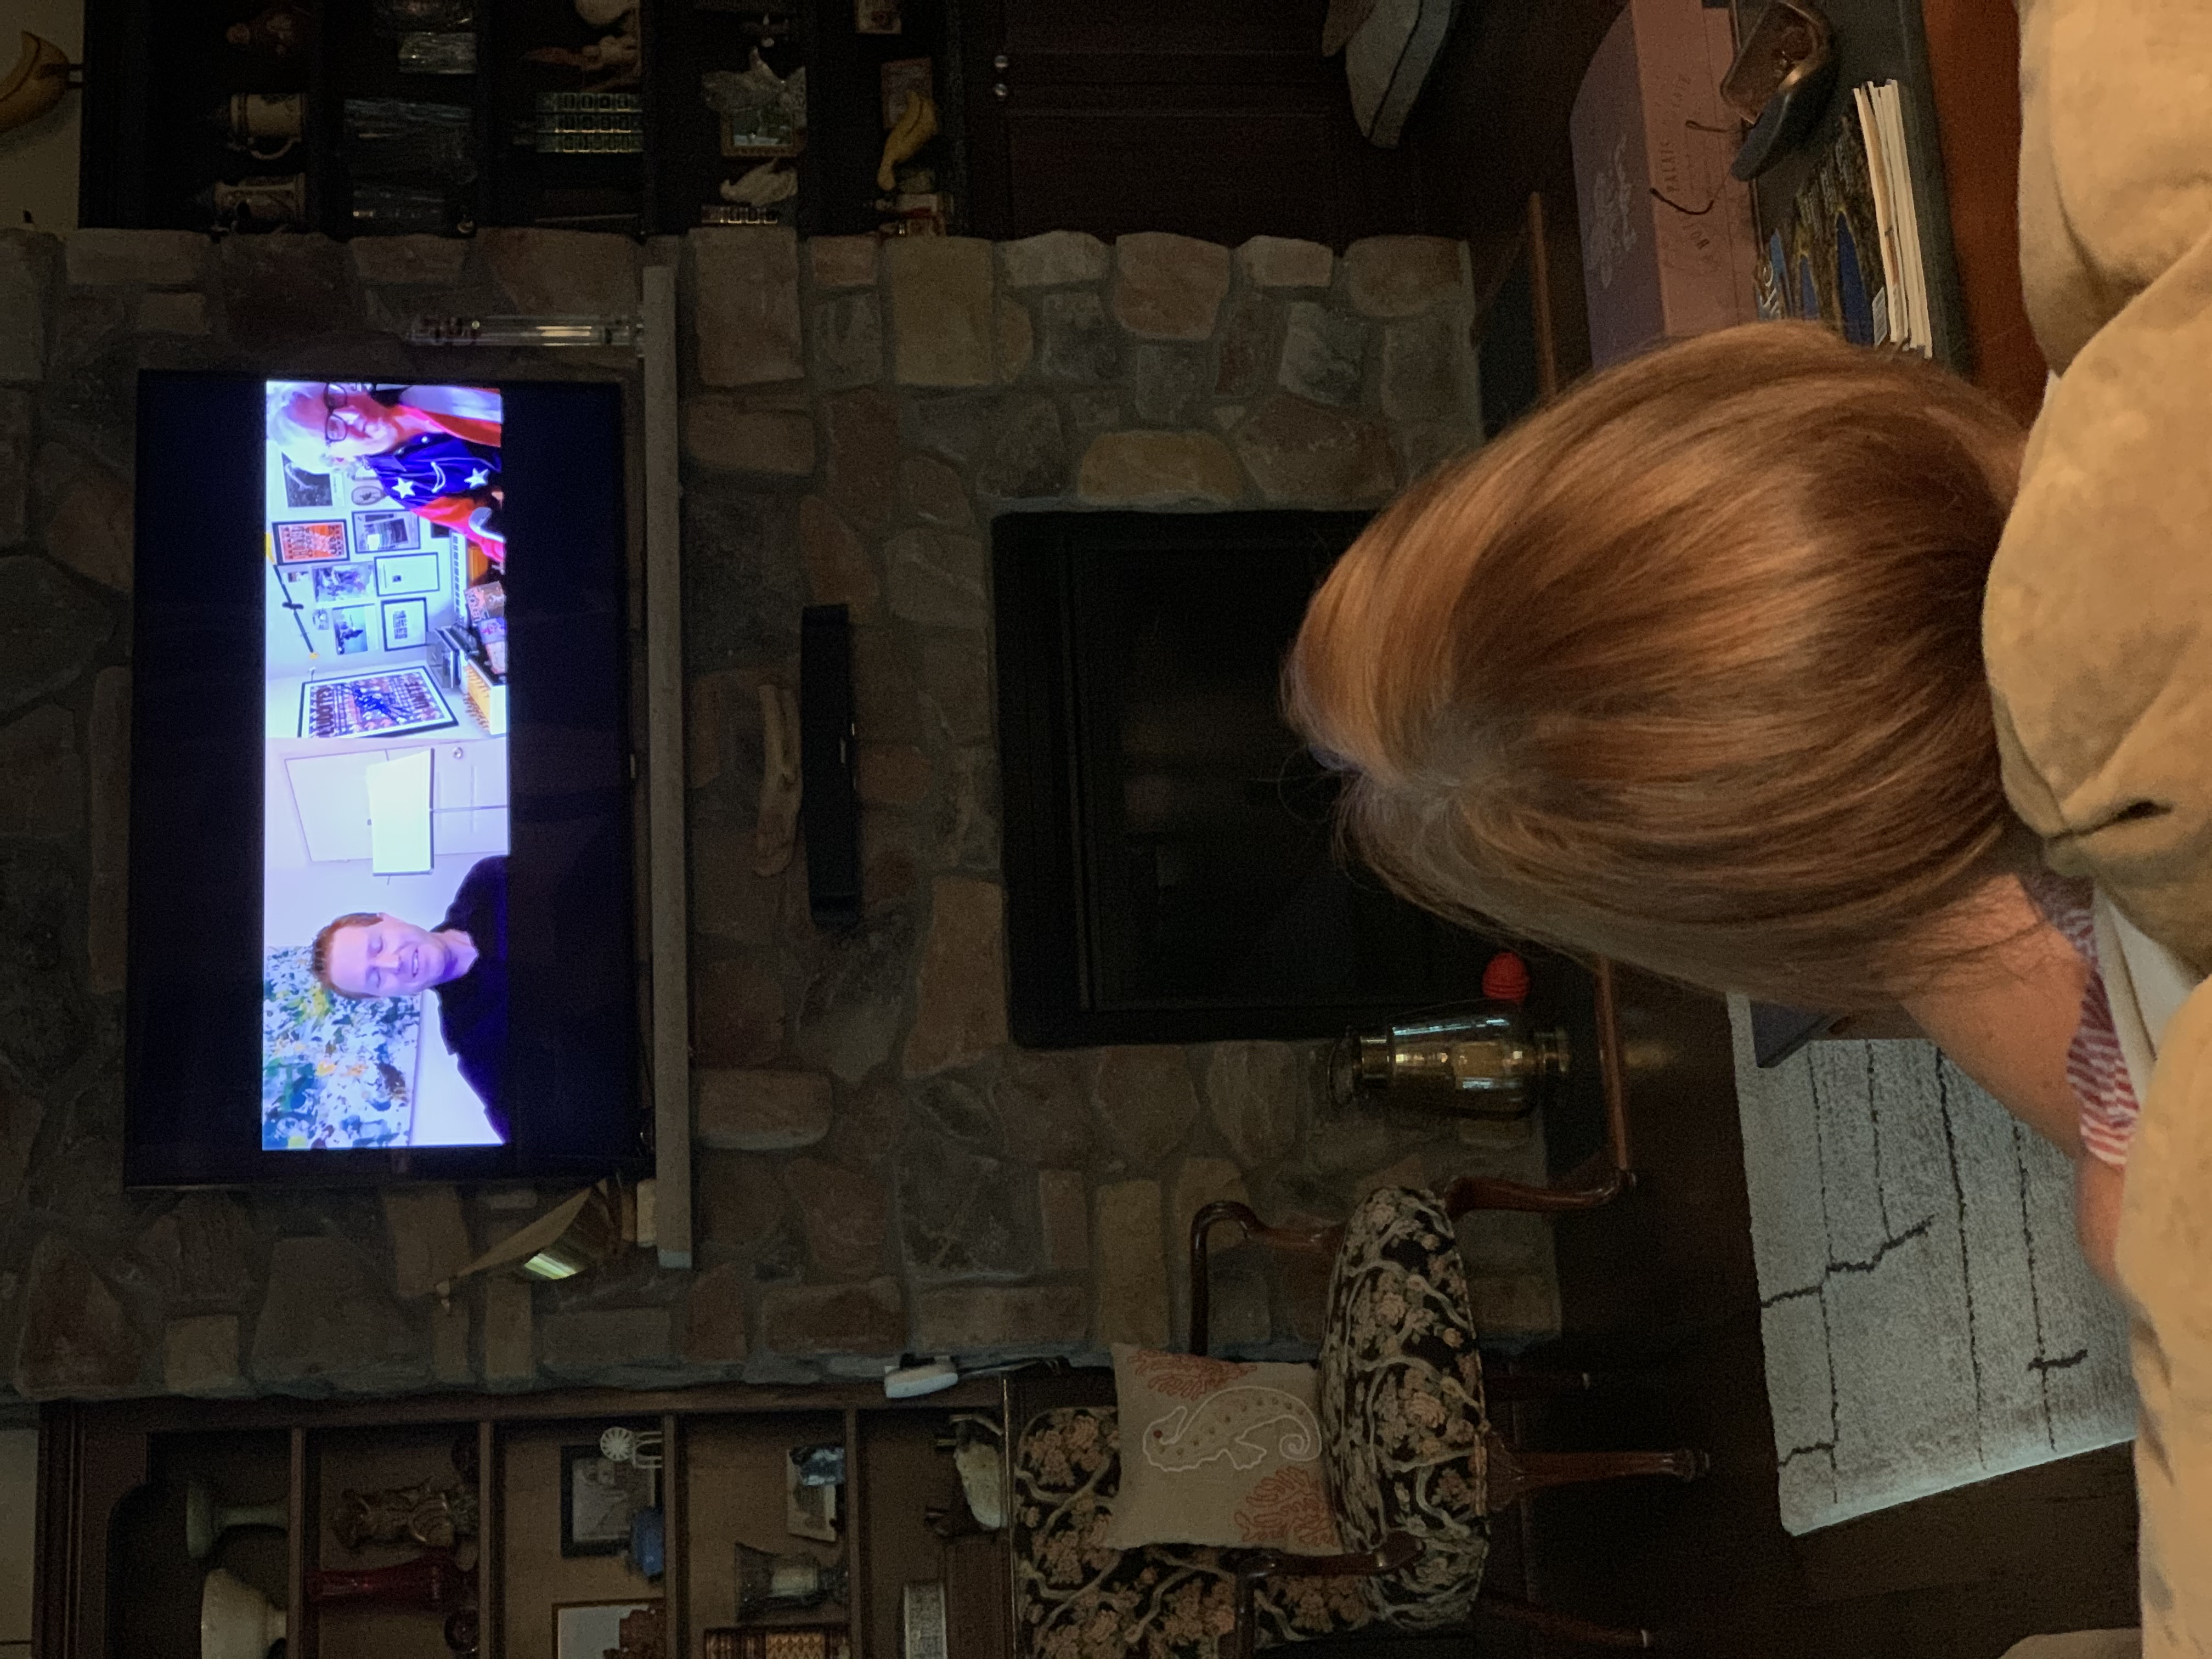 Photo of woman watching the livestream on a television set above a fireplace.